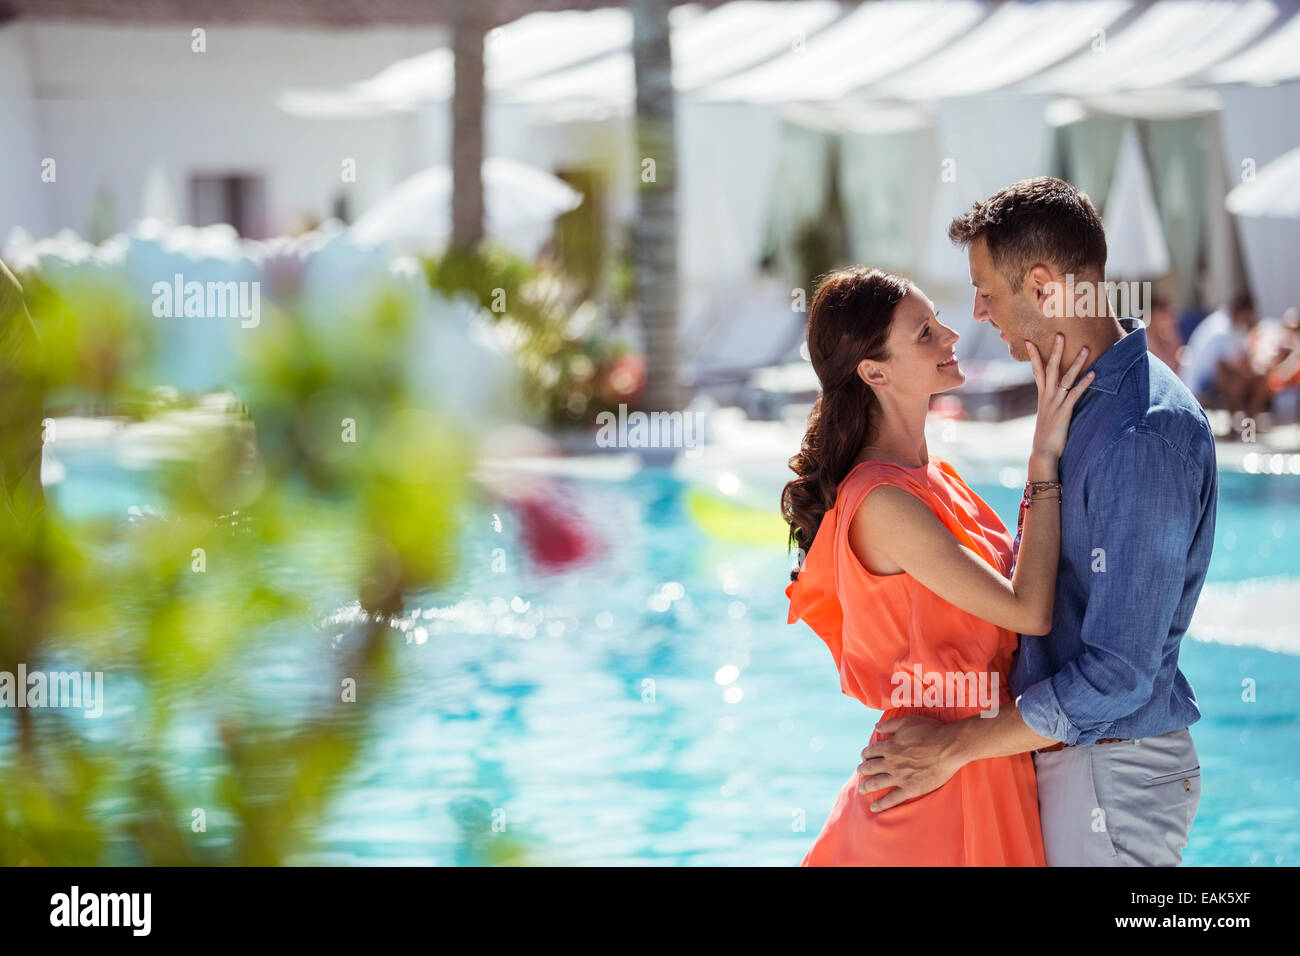 Couple standing face to face by swimming pool Stock Photo